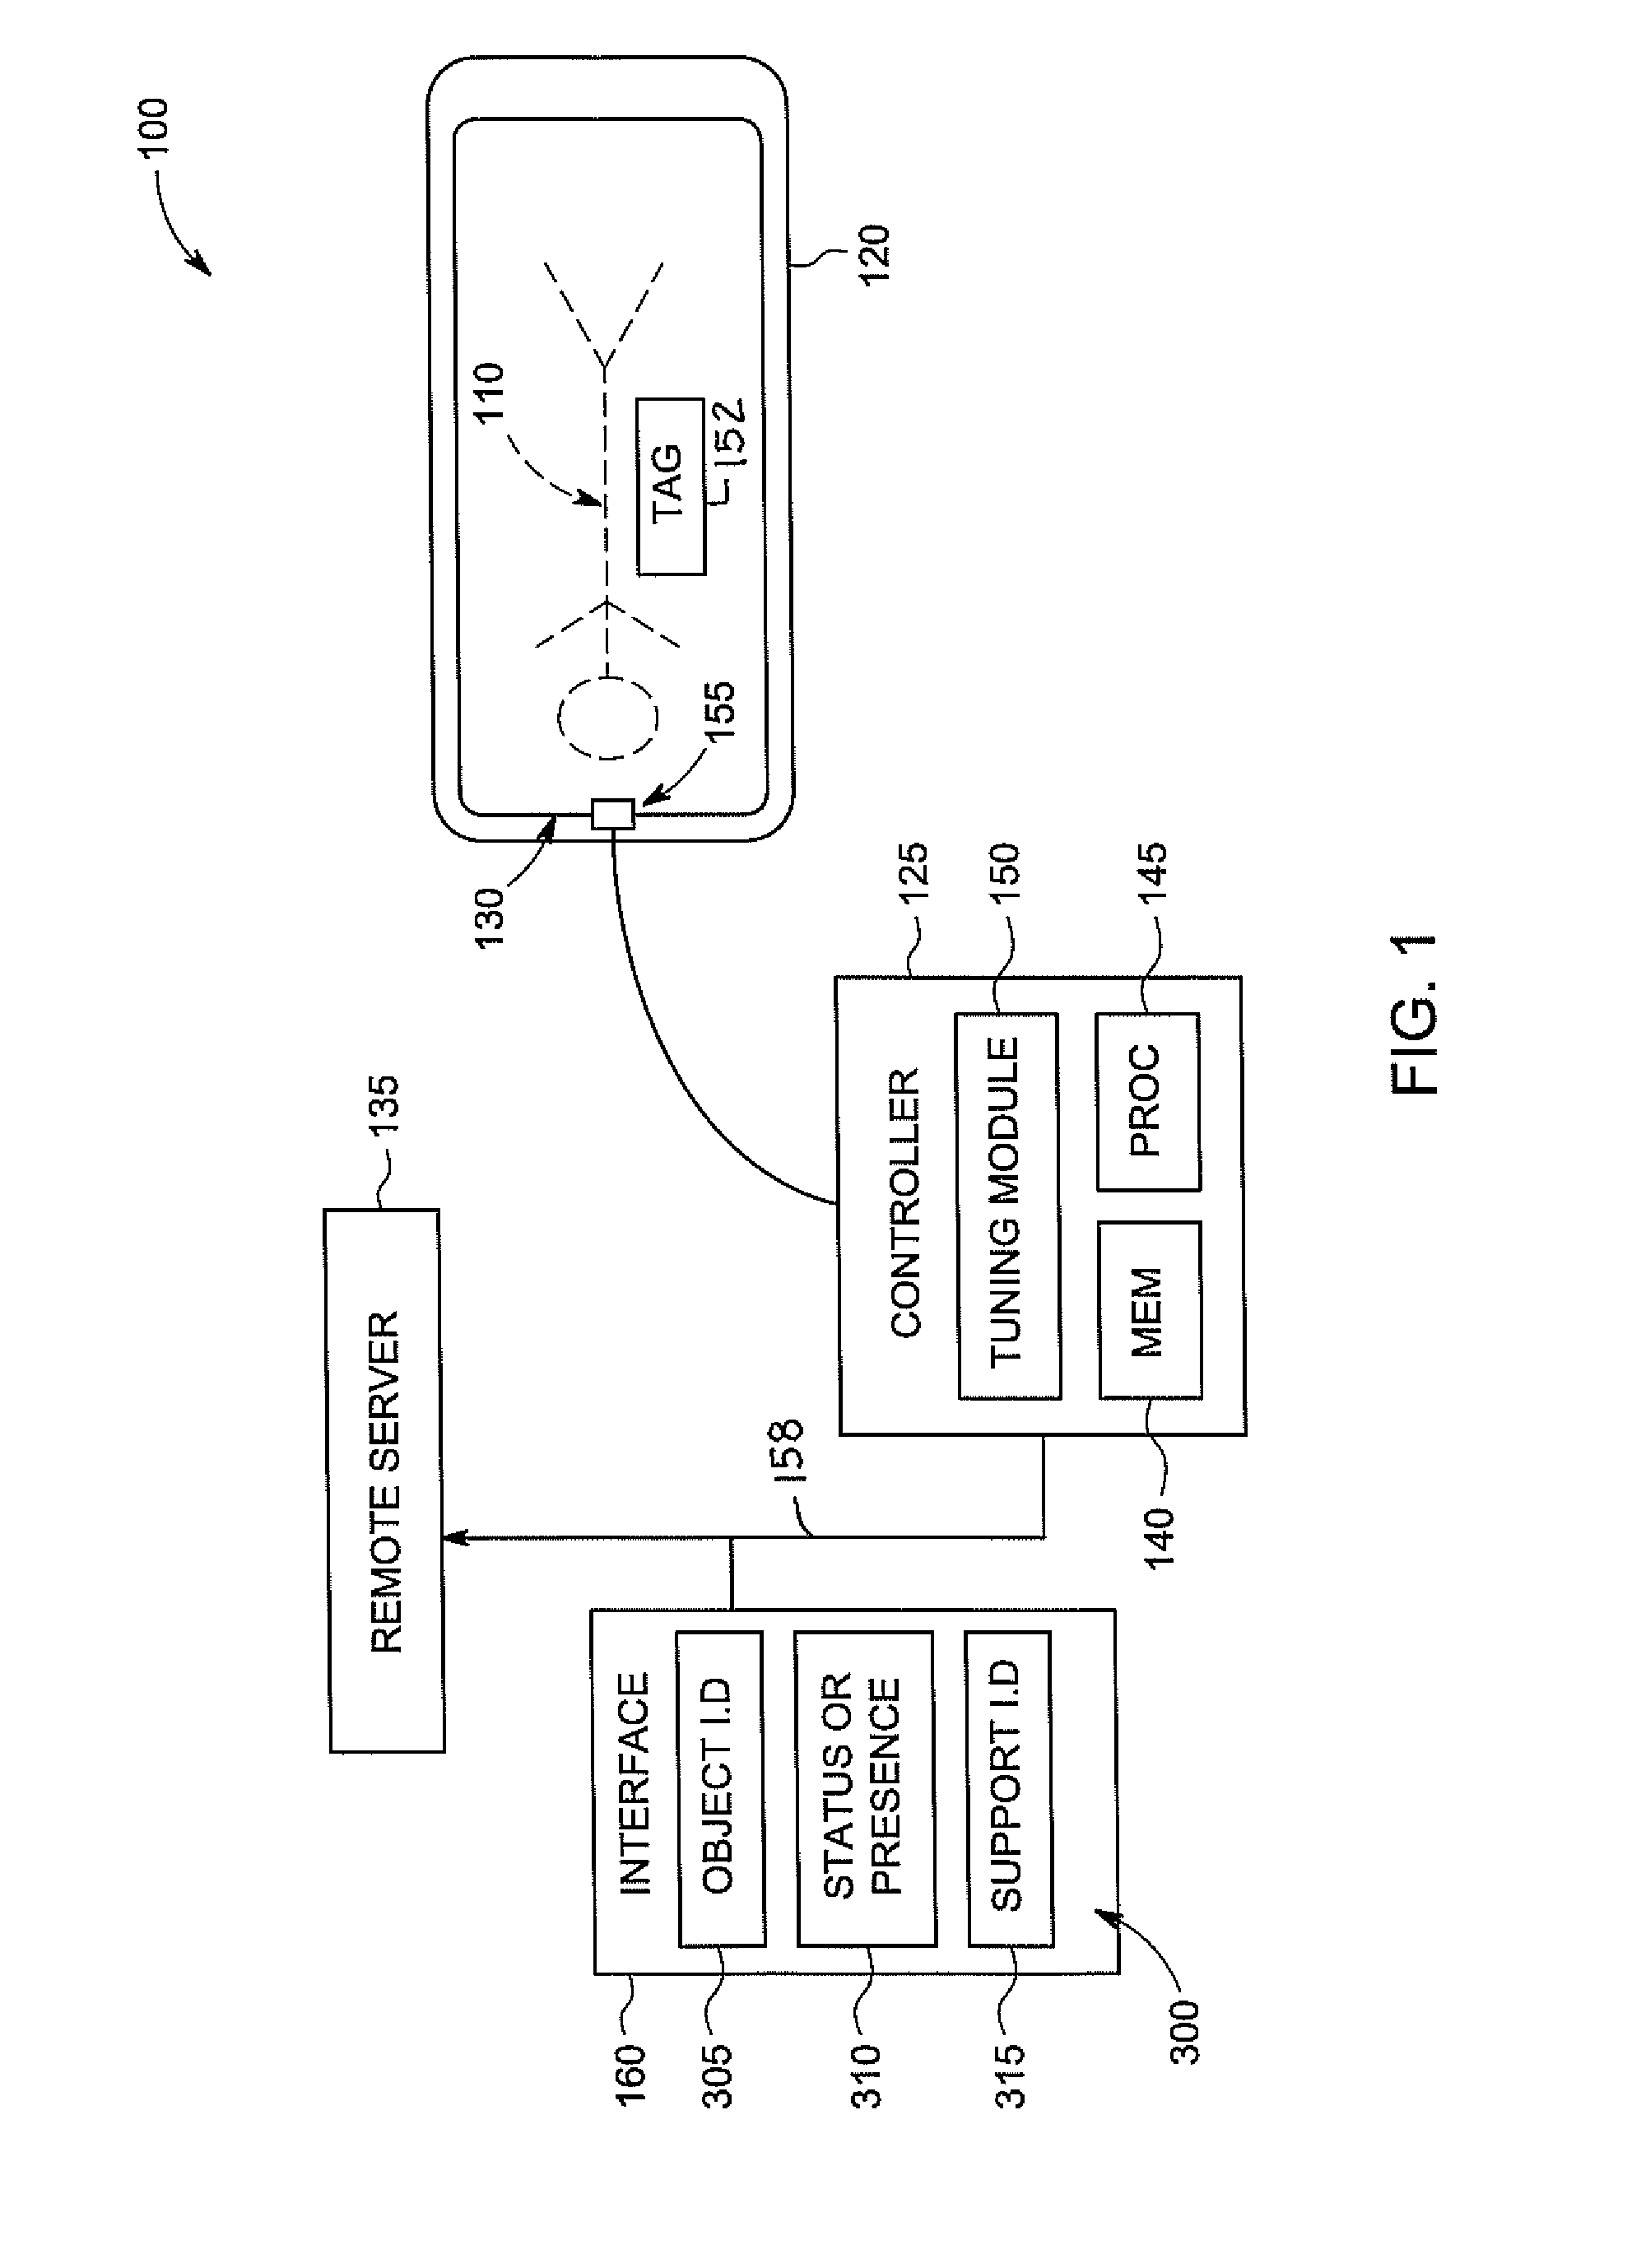 System and method to detect a presence of an object relative to a support